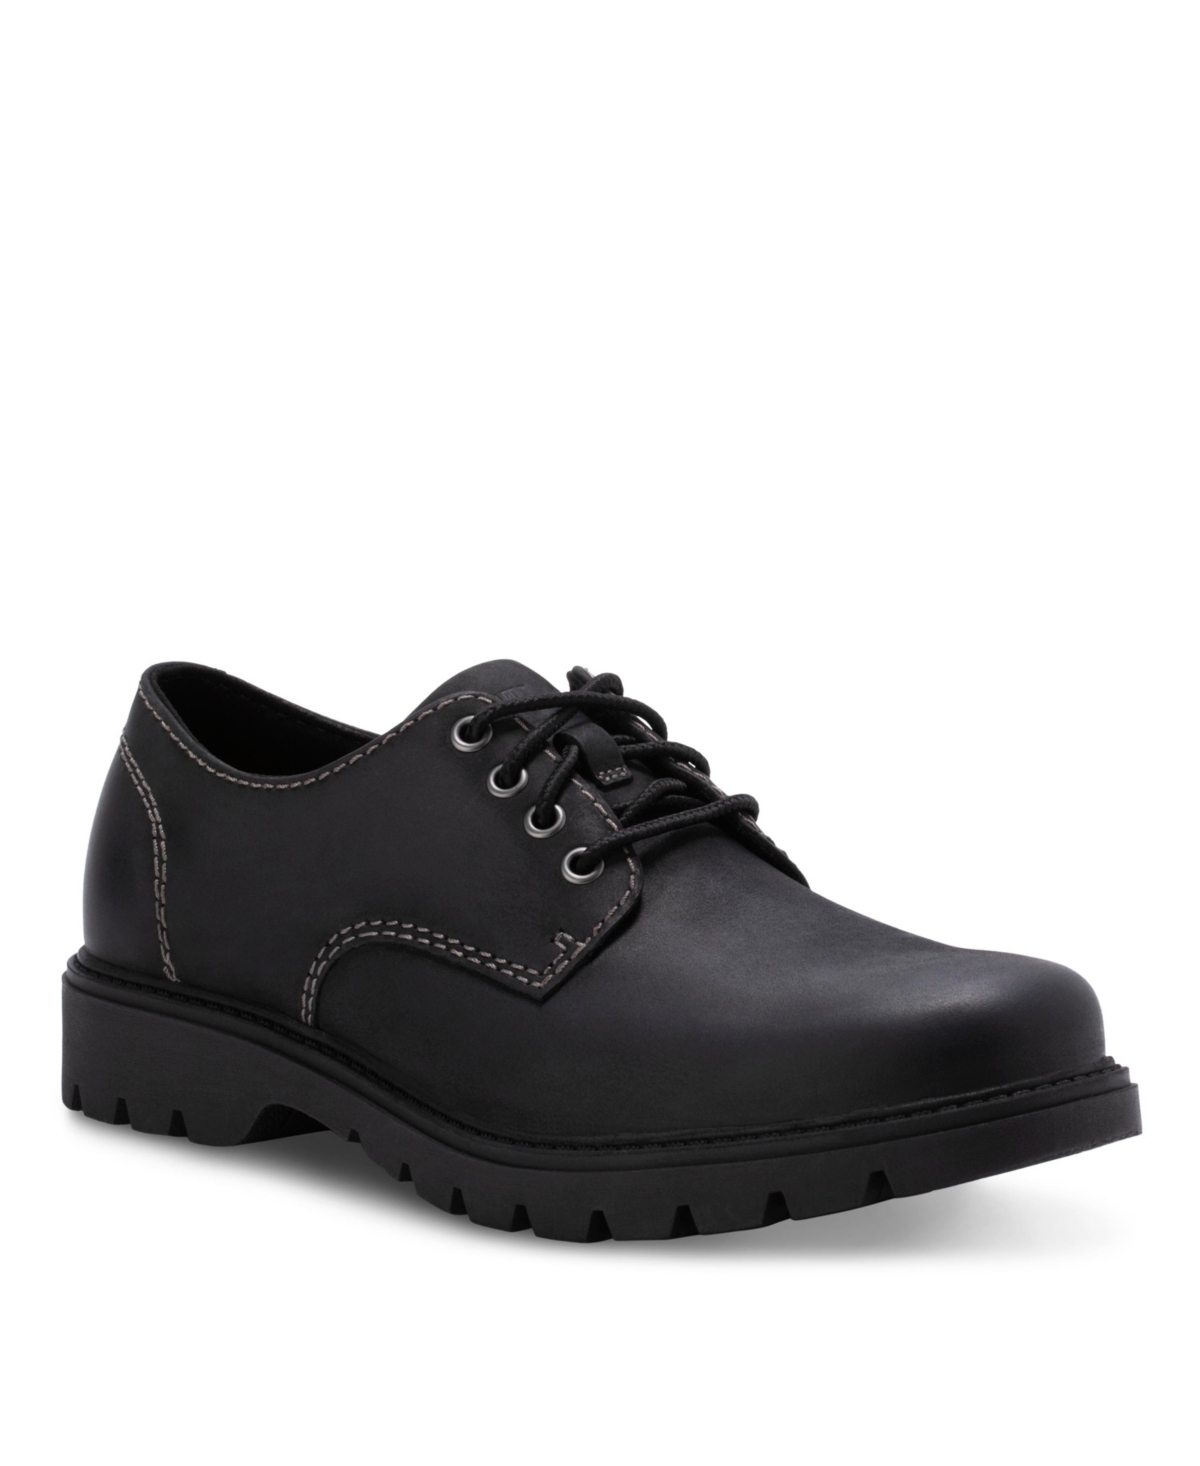 Men's Lowell Oxford Lace Up Shoes - Black